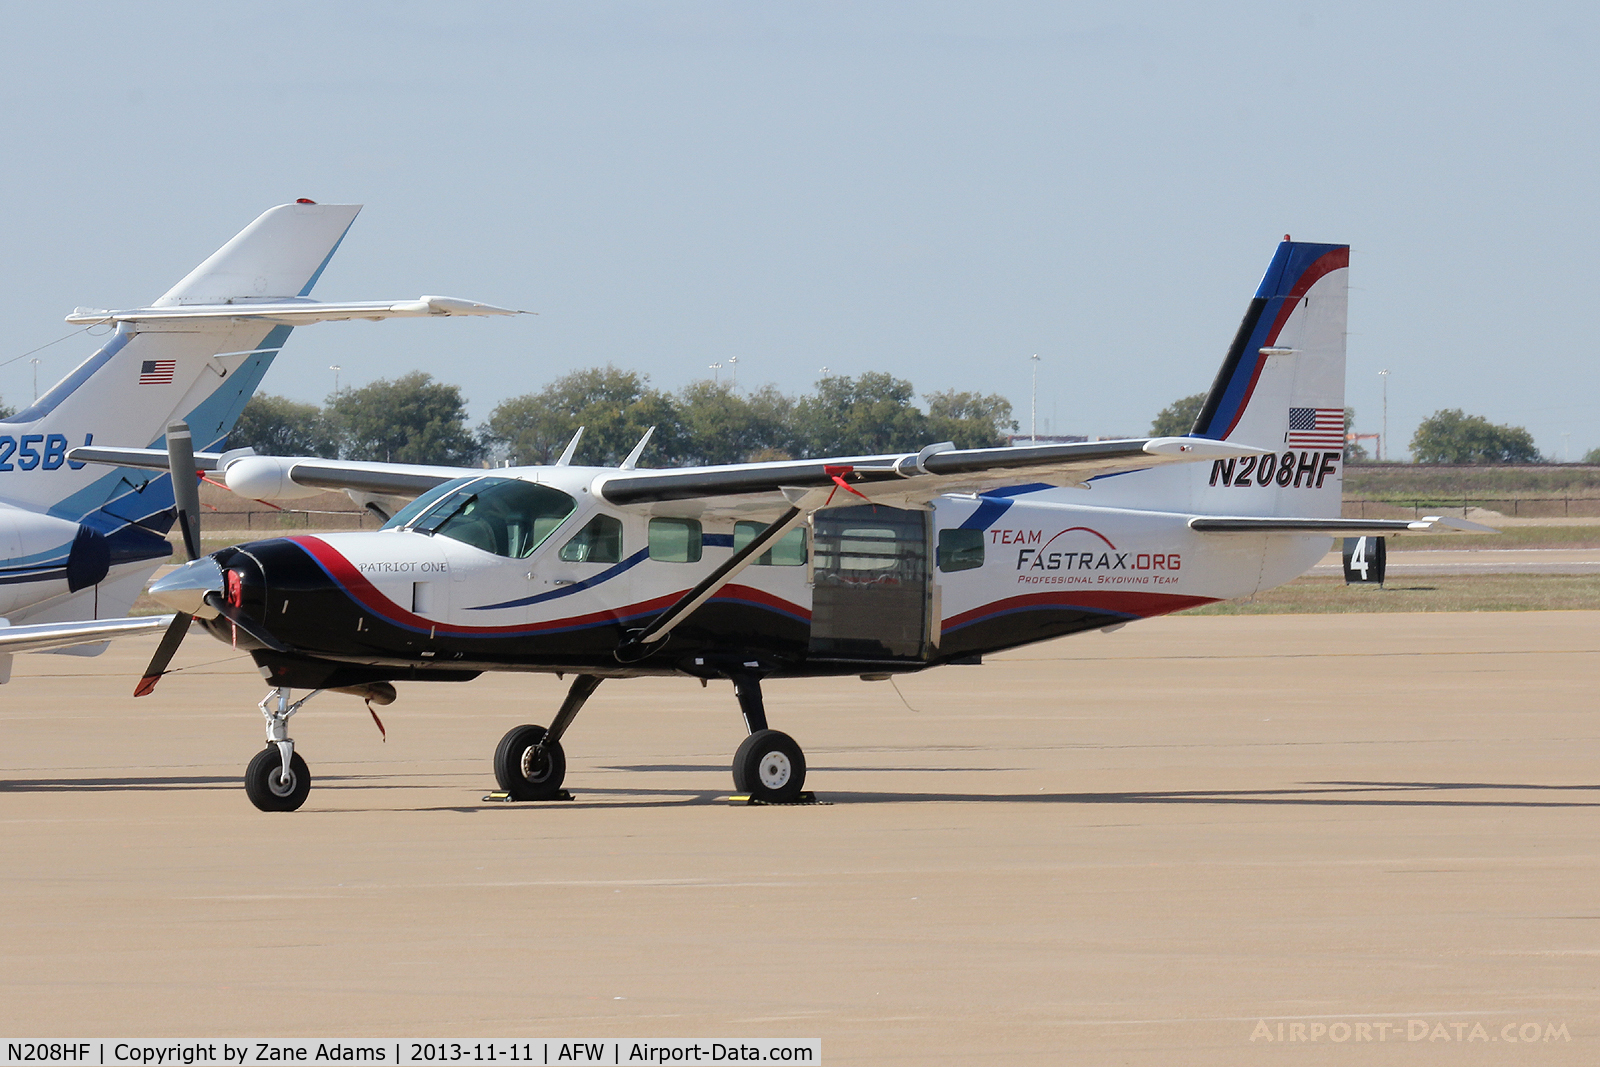 N208HF, 1987 Cessna 208 C/N 20800116, At Alliance Airport - Fort Worth, TX